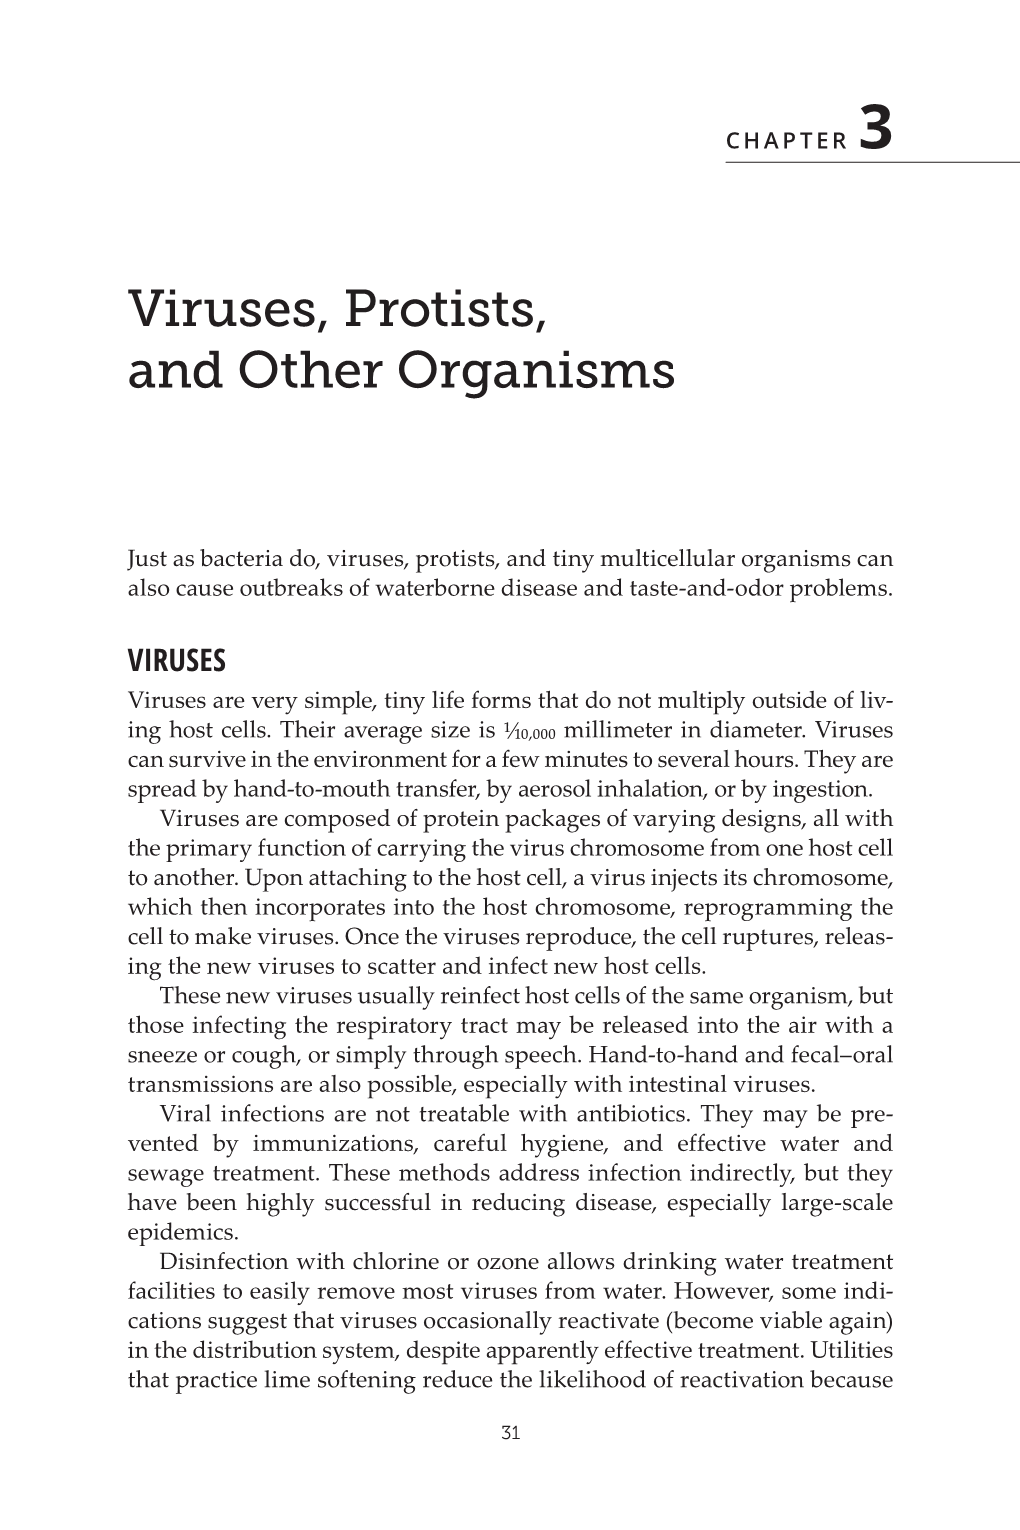 Viruses, Protists, and Other Organisms